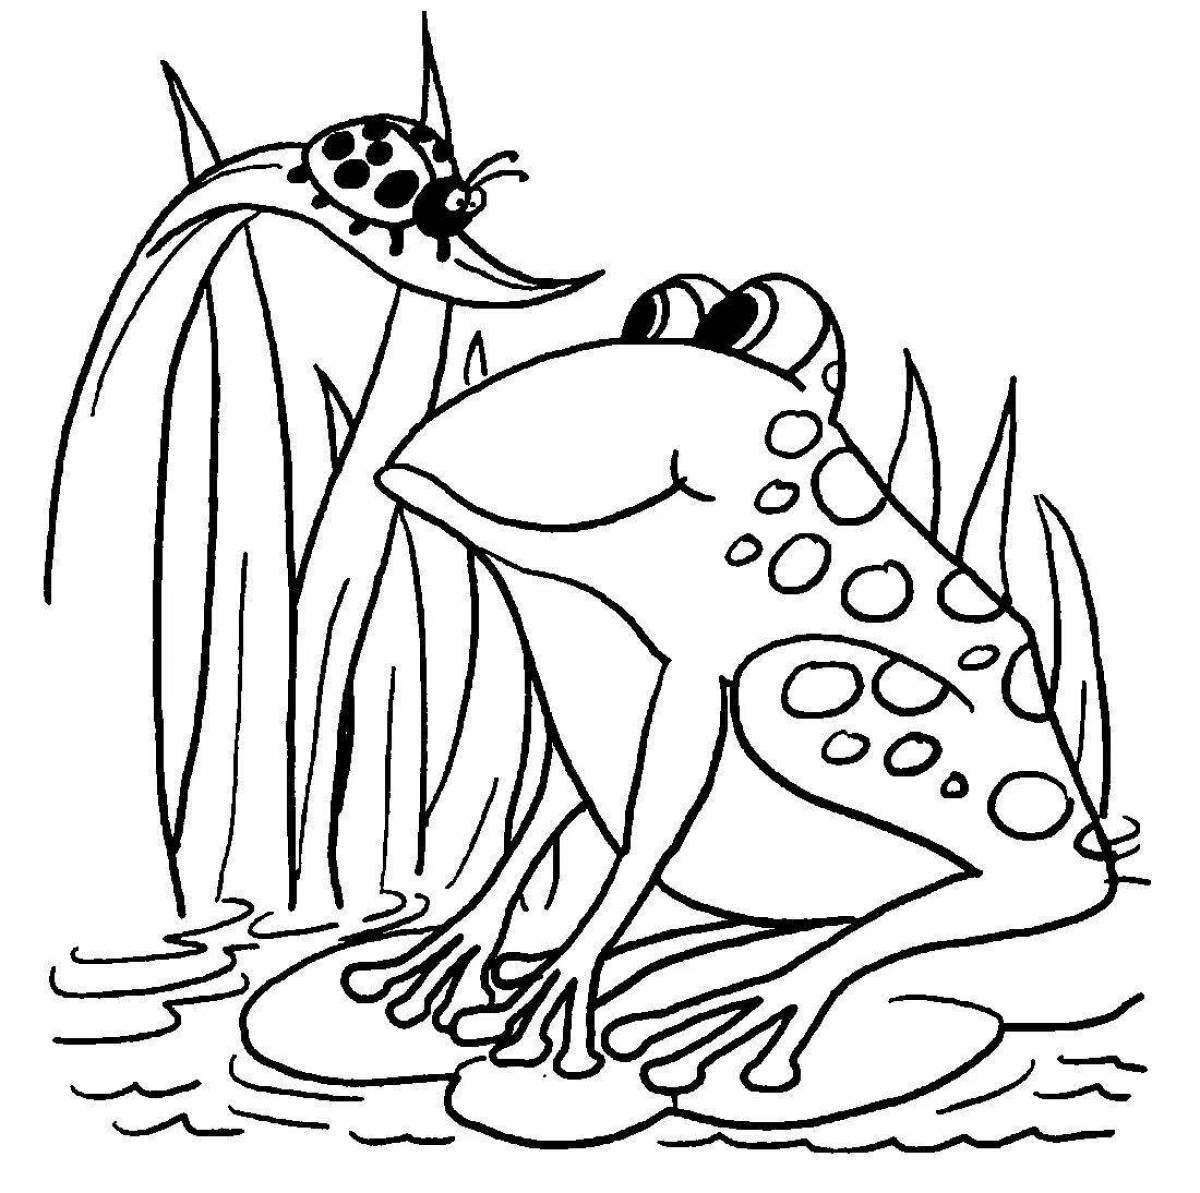 Adorable frog girl coloring page